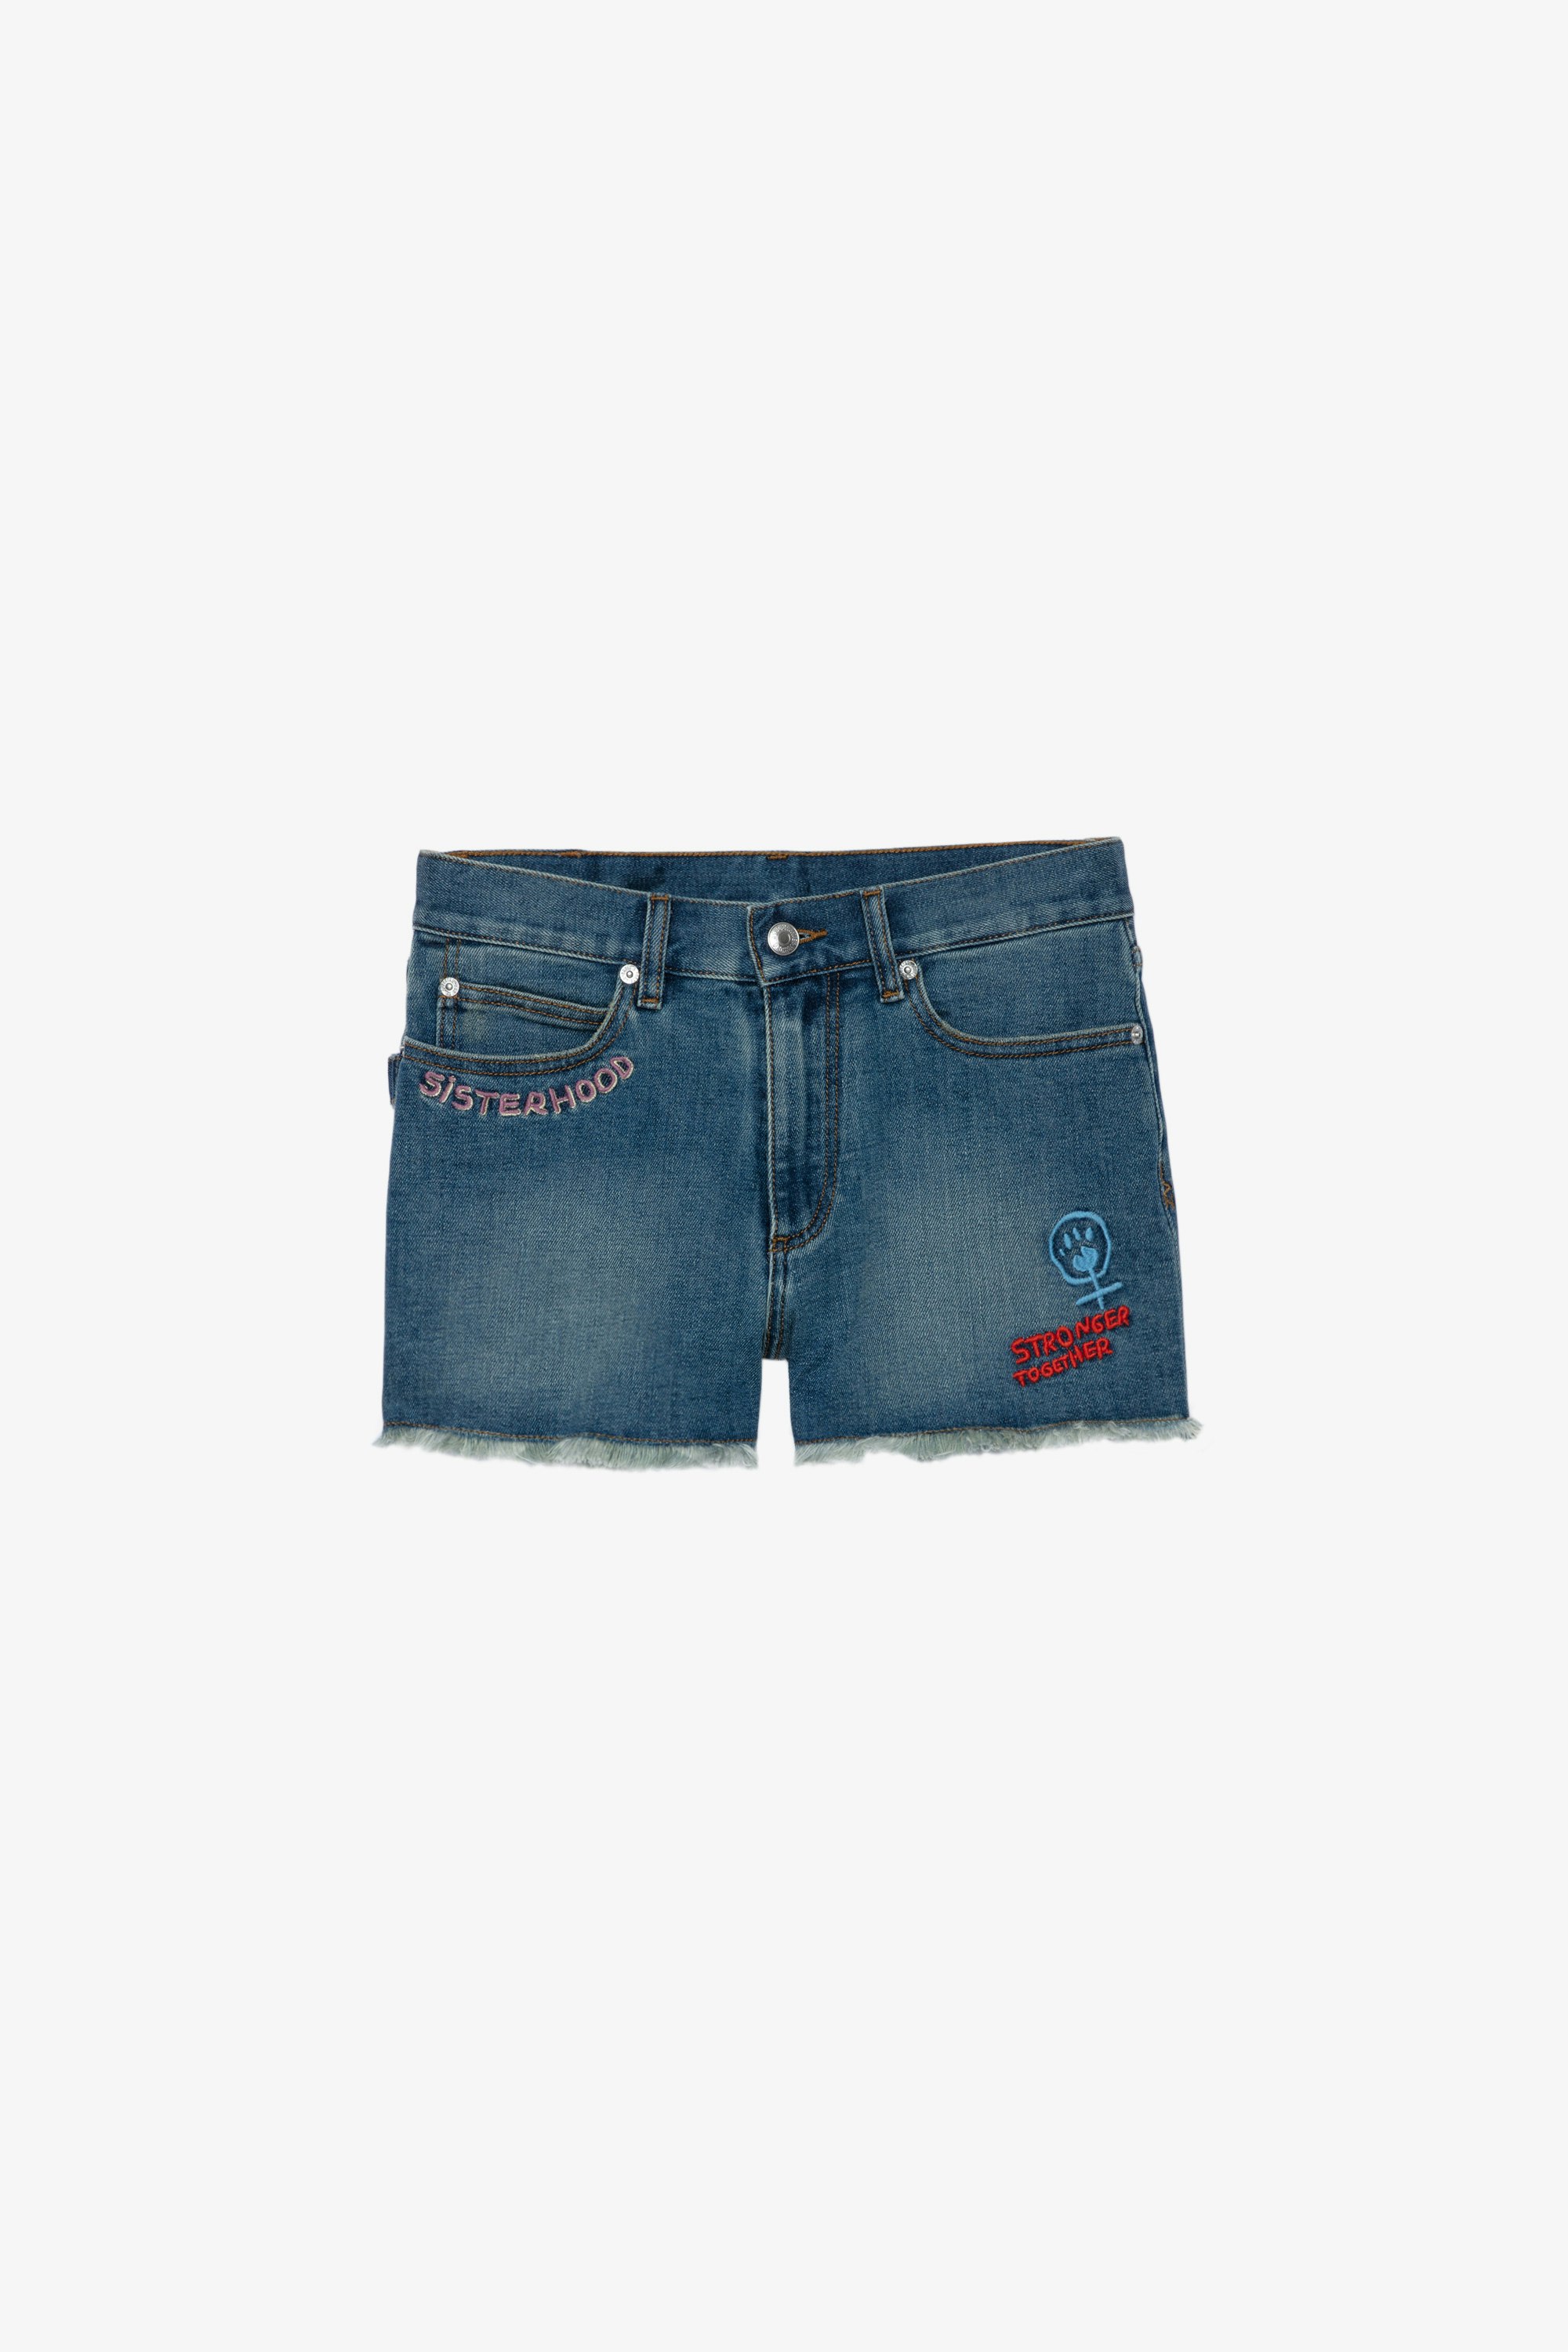 Band of Sisters Storm ショーツ Women’s Band of Sisters embroidered denim shorts